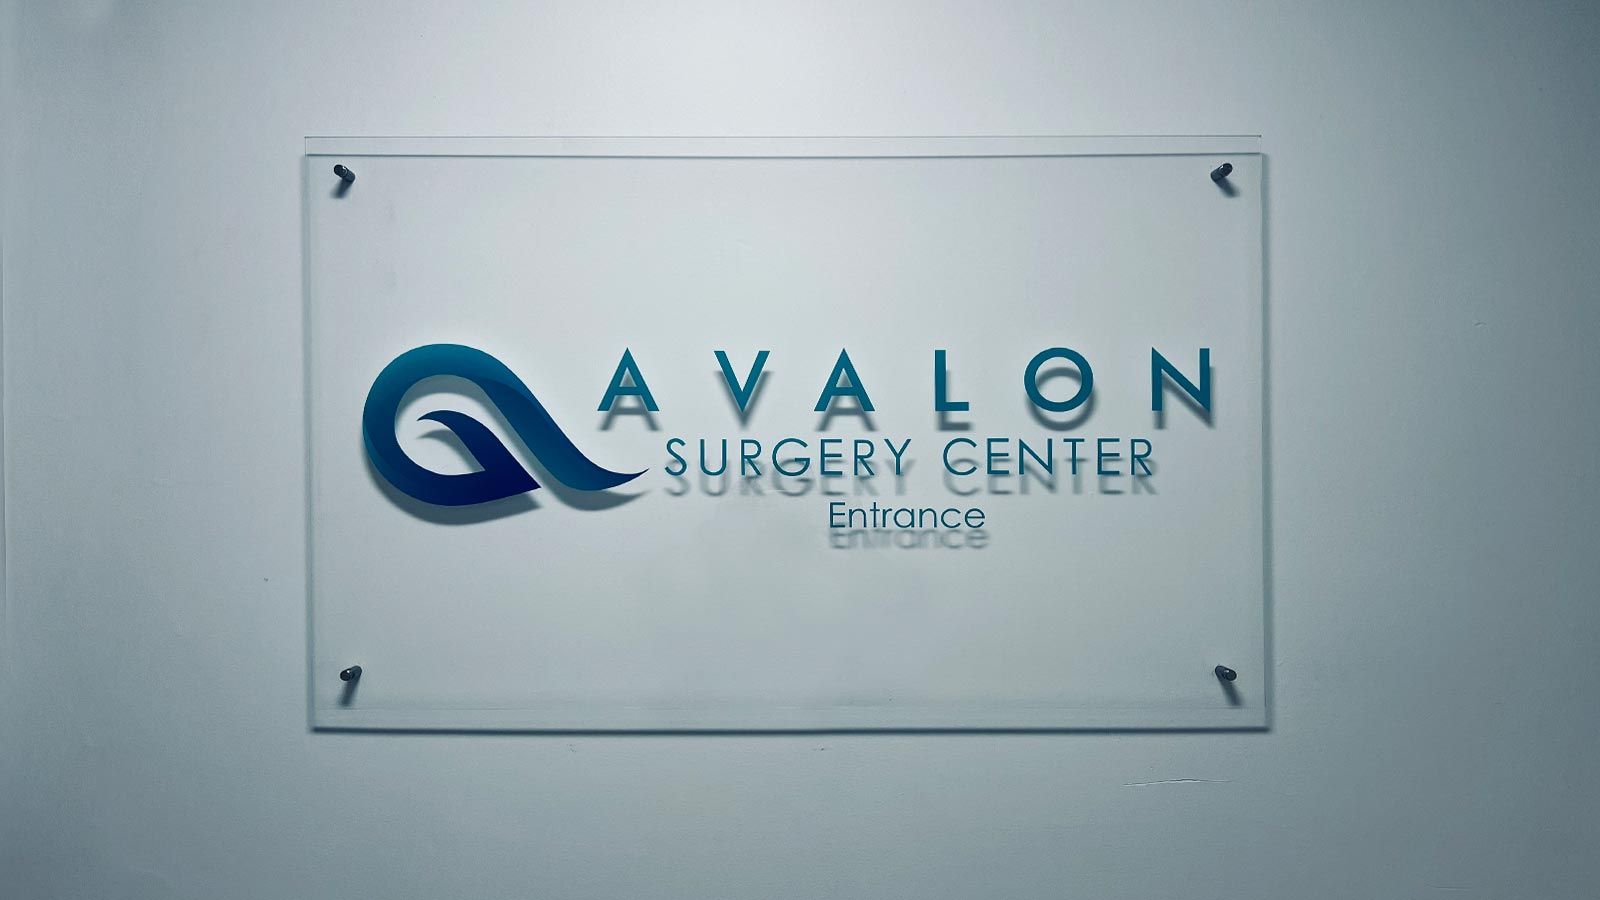 Avalon Surgery Center interior sign fixed to the wall